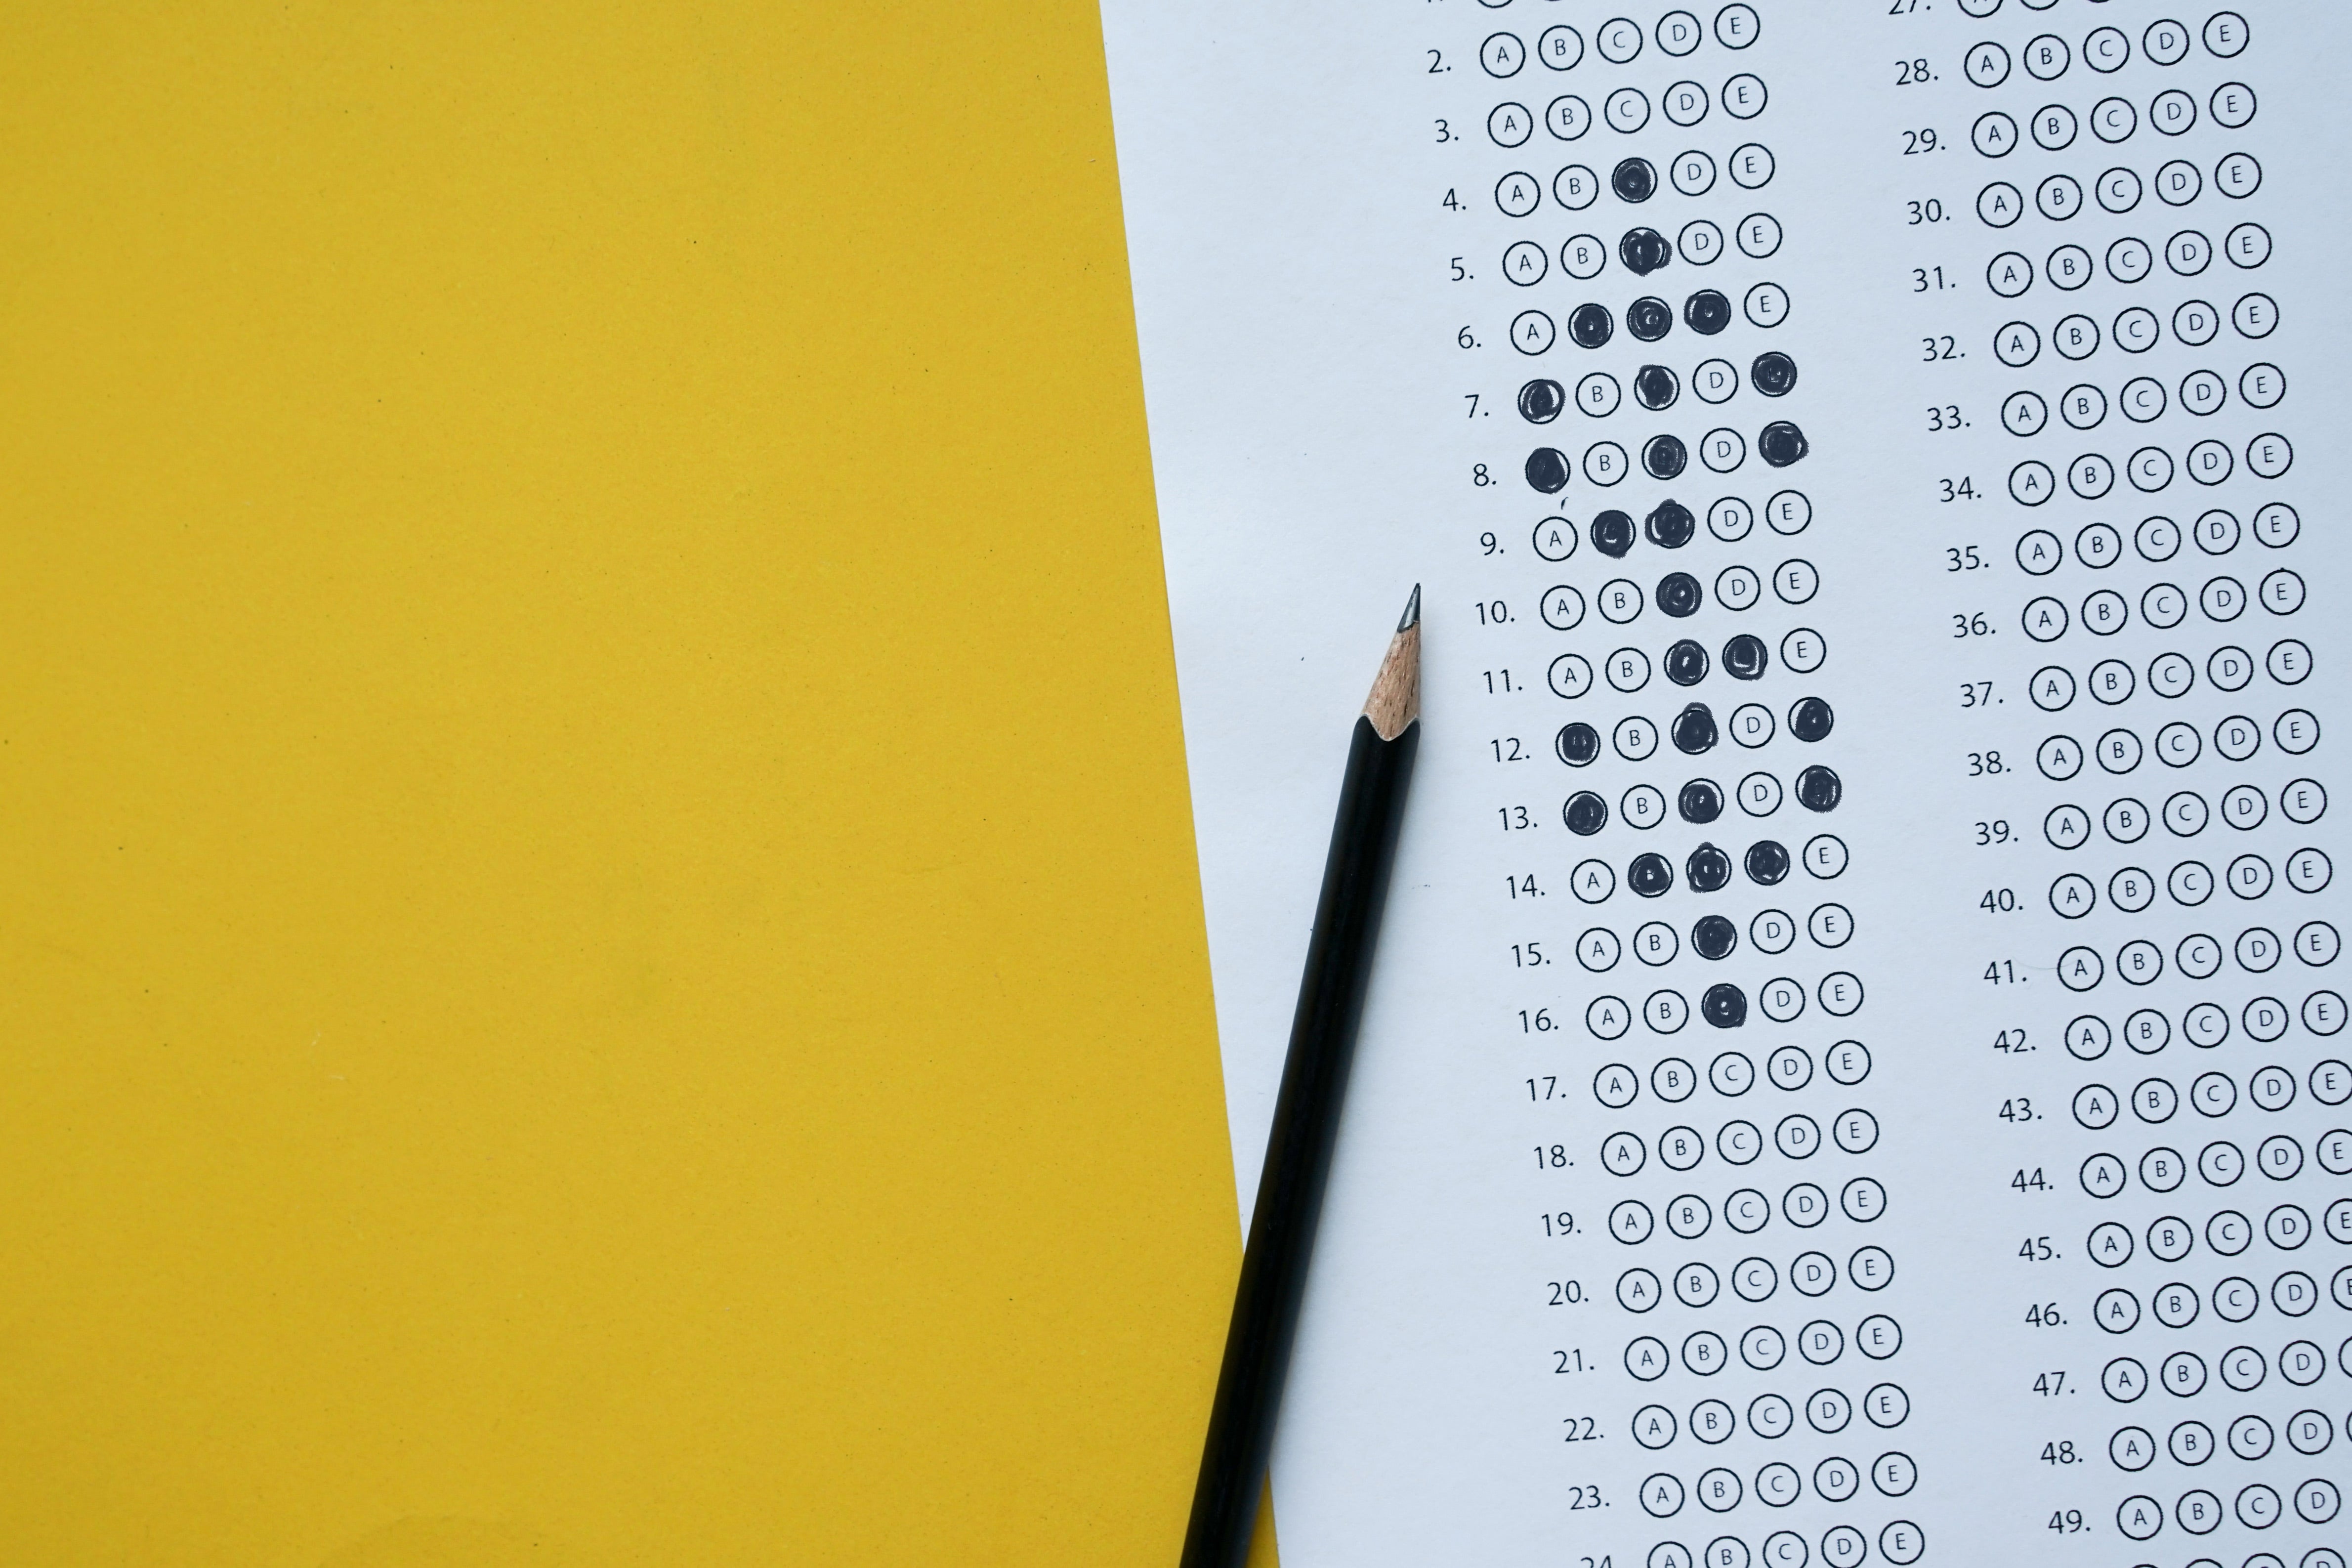 A partially filled-in scantron and pencil over a bright yellow background.